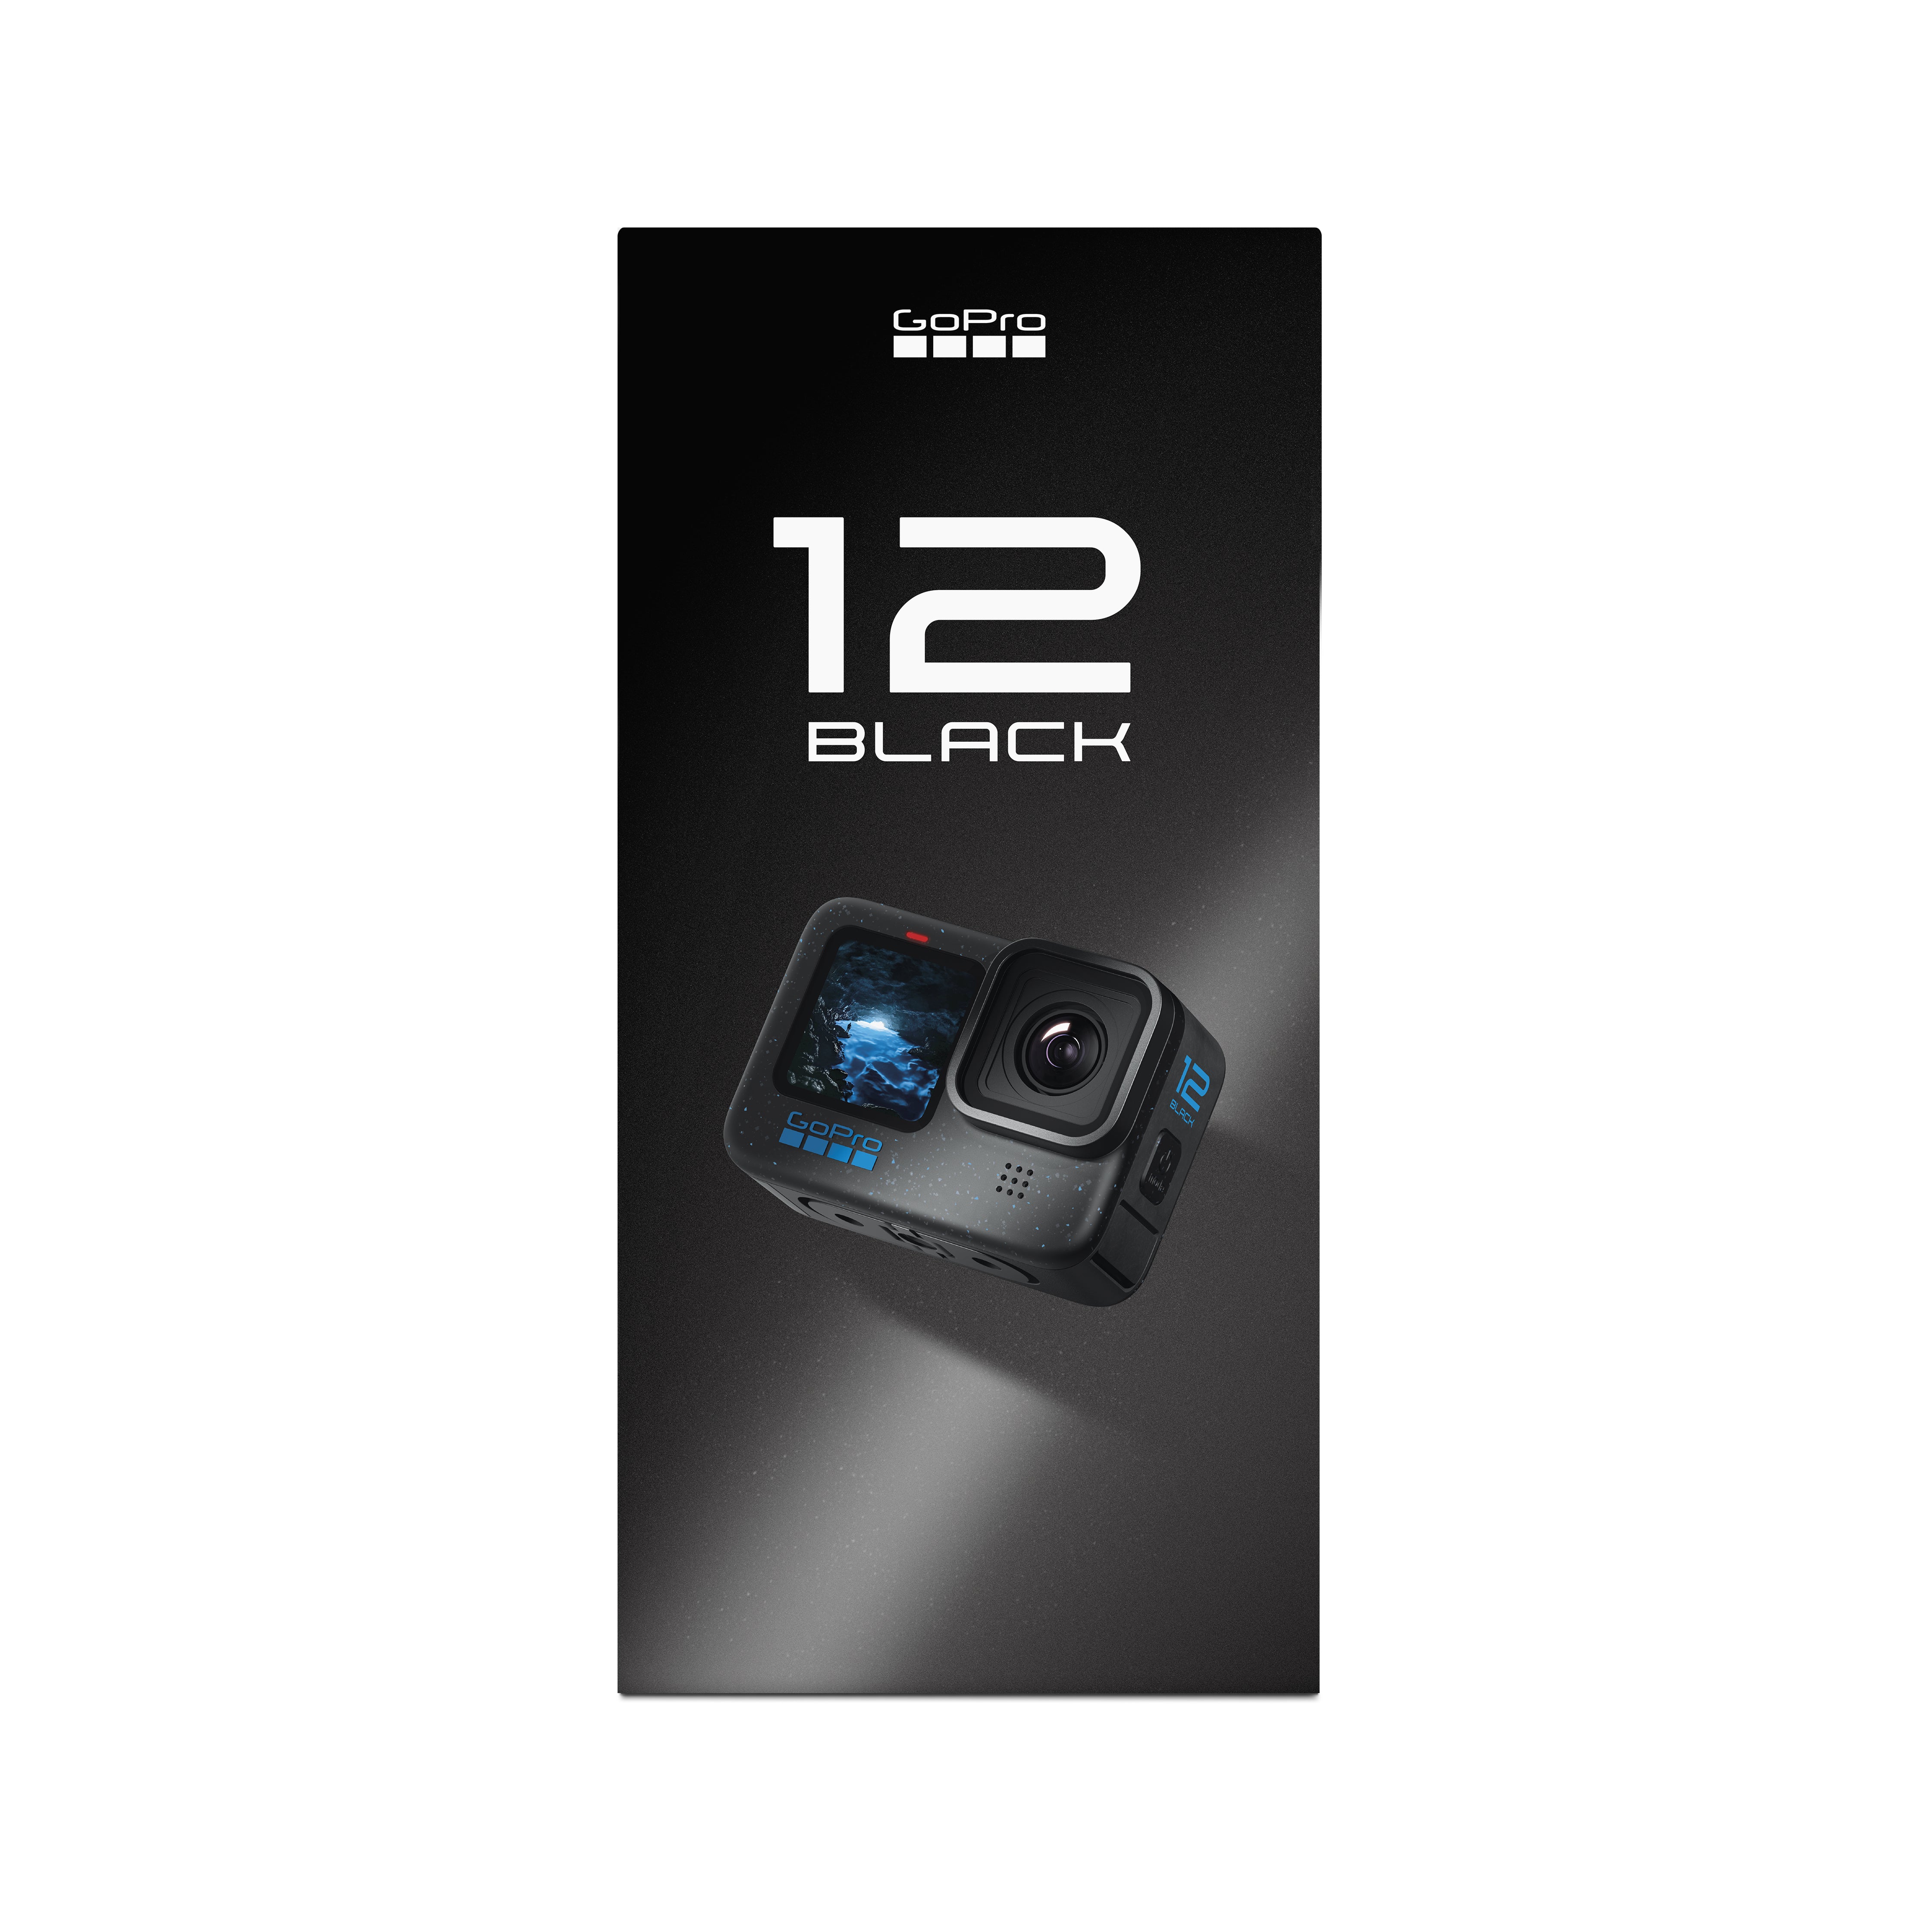 GoPro HERO12 Black with FREE SanDisk Extreme 64GB SD Card